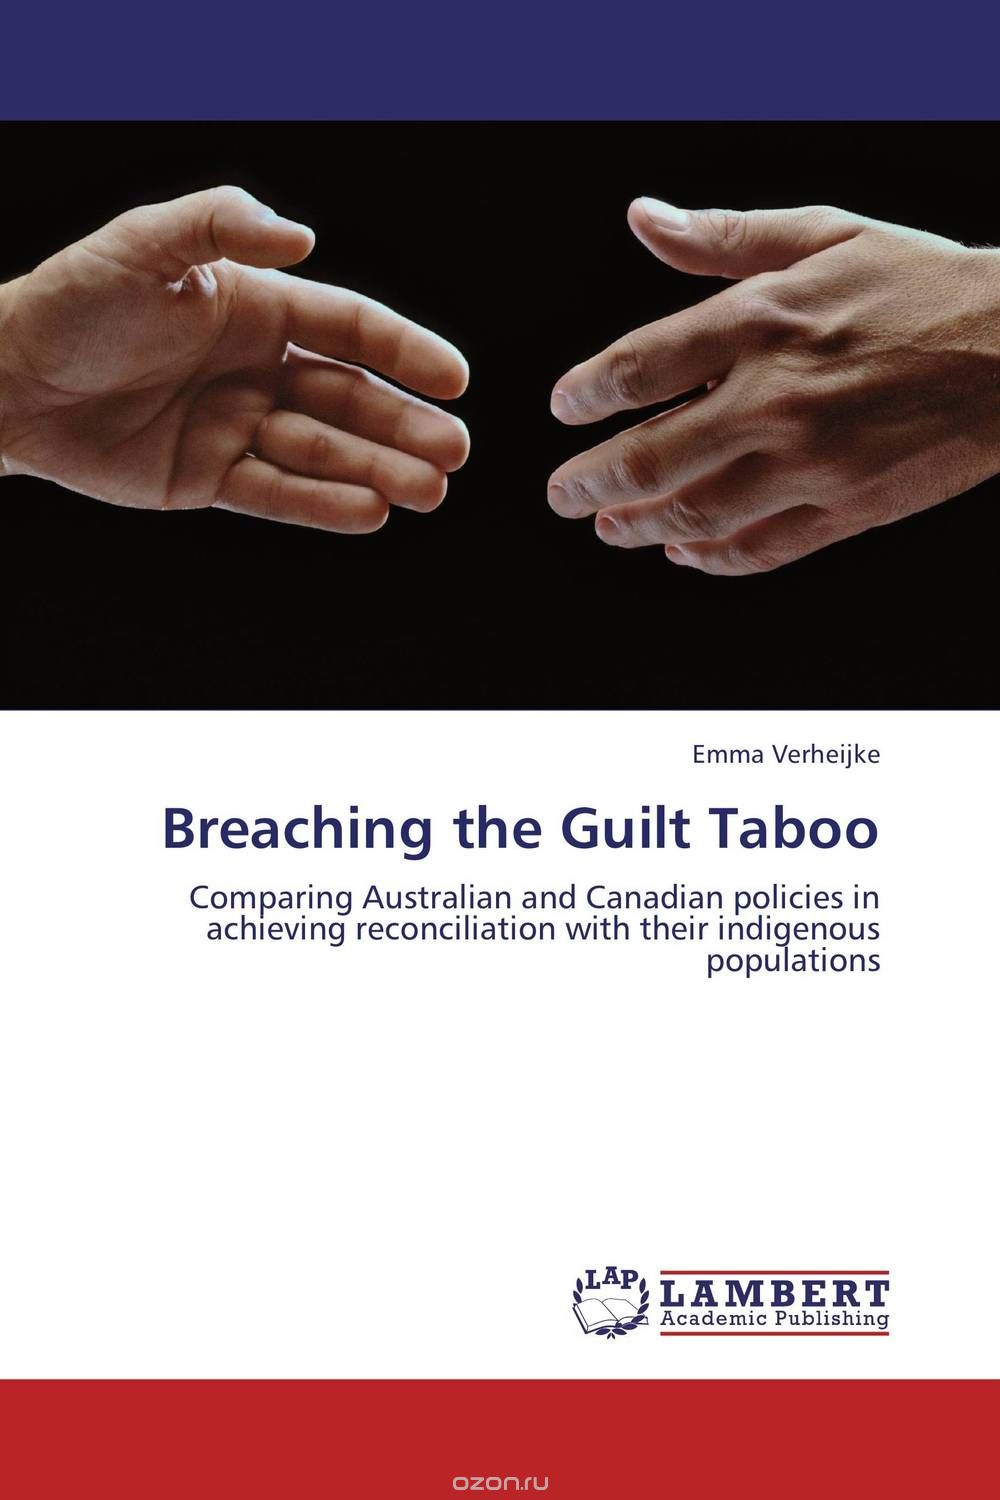 Breaching the Guilt Taboo